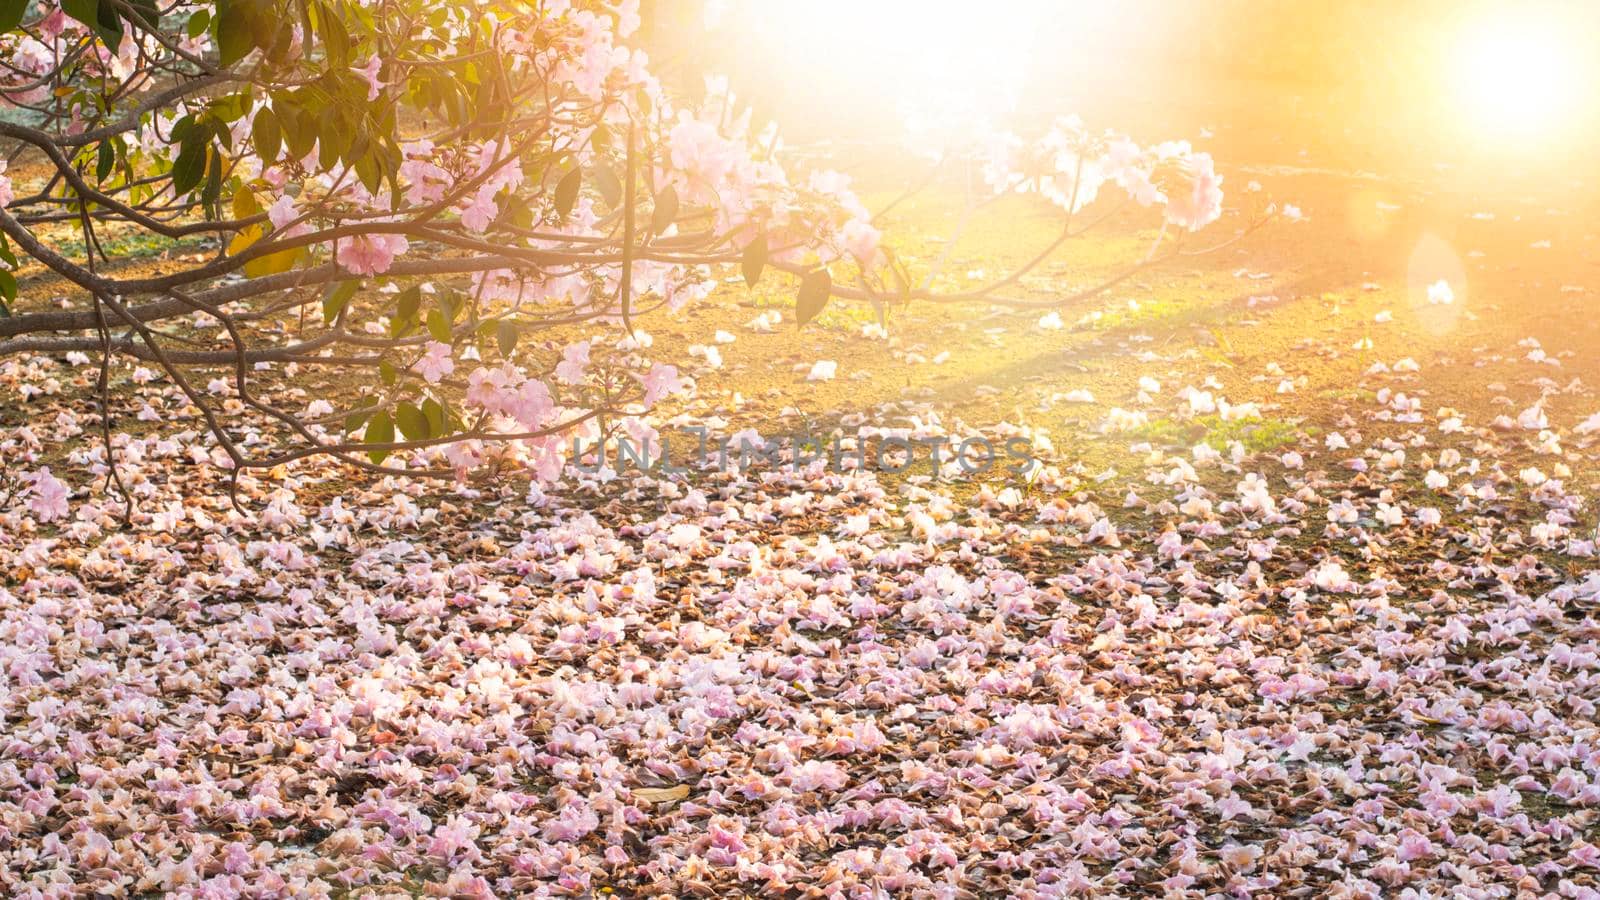 Romantic cherry blossom  fallen on ground on nature background in Spring sunlight by Petrichor